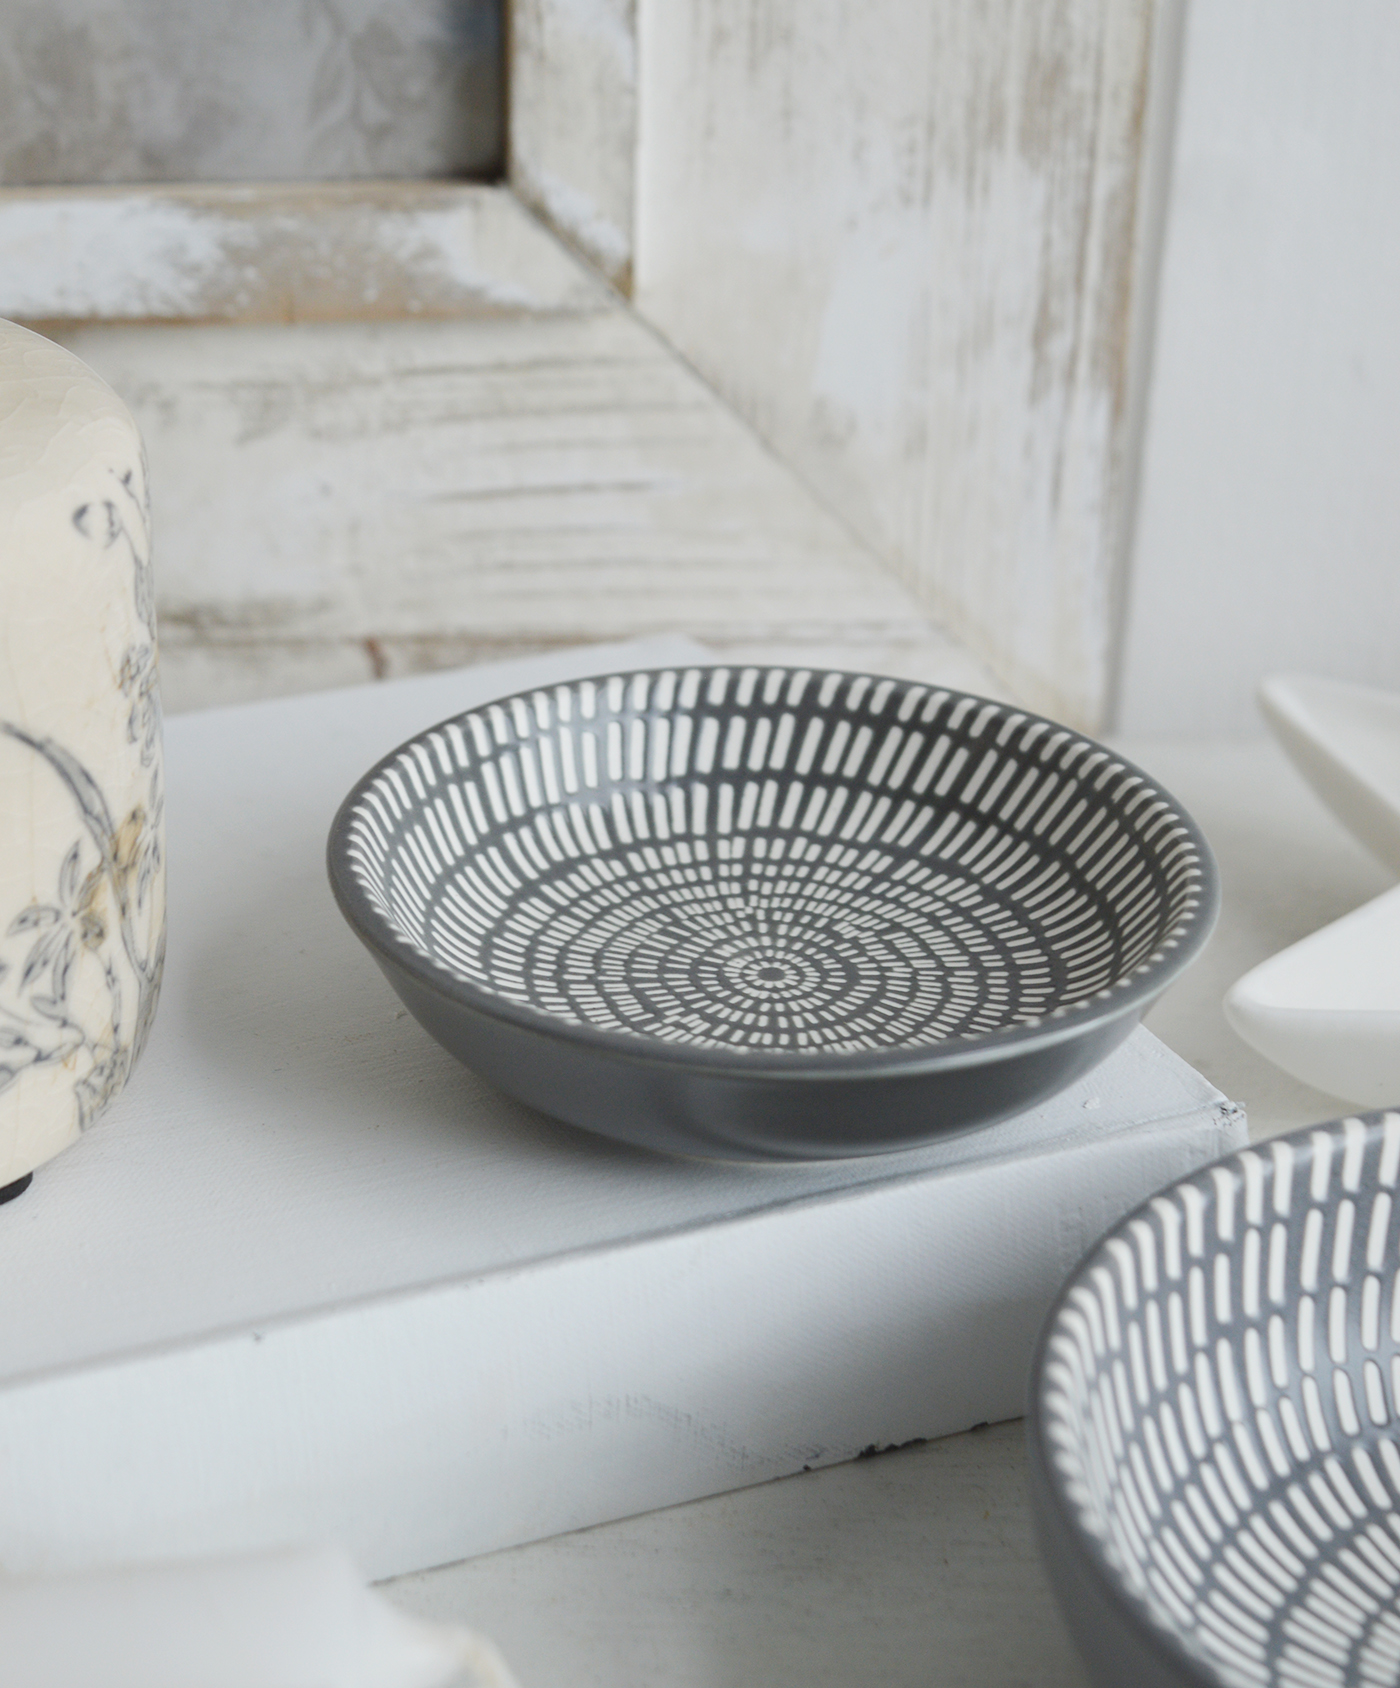 Norwell Grey and White Trinket Dishes for New England styling and white interiors. Coastal, modern farmhouse furniture and home decor